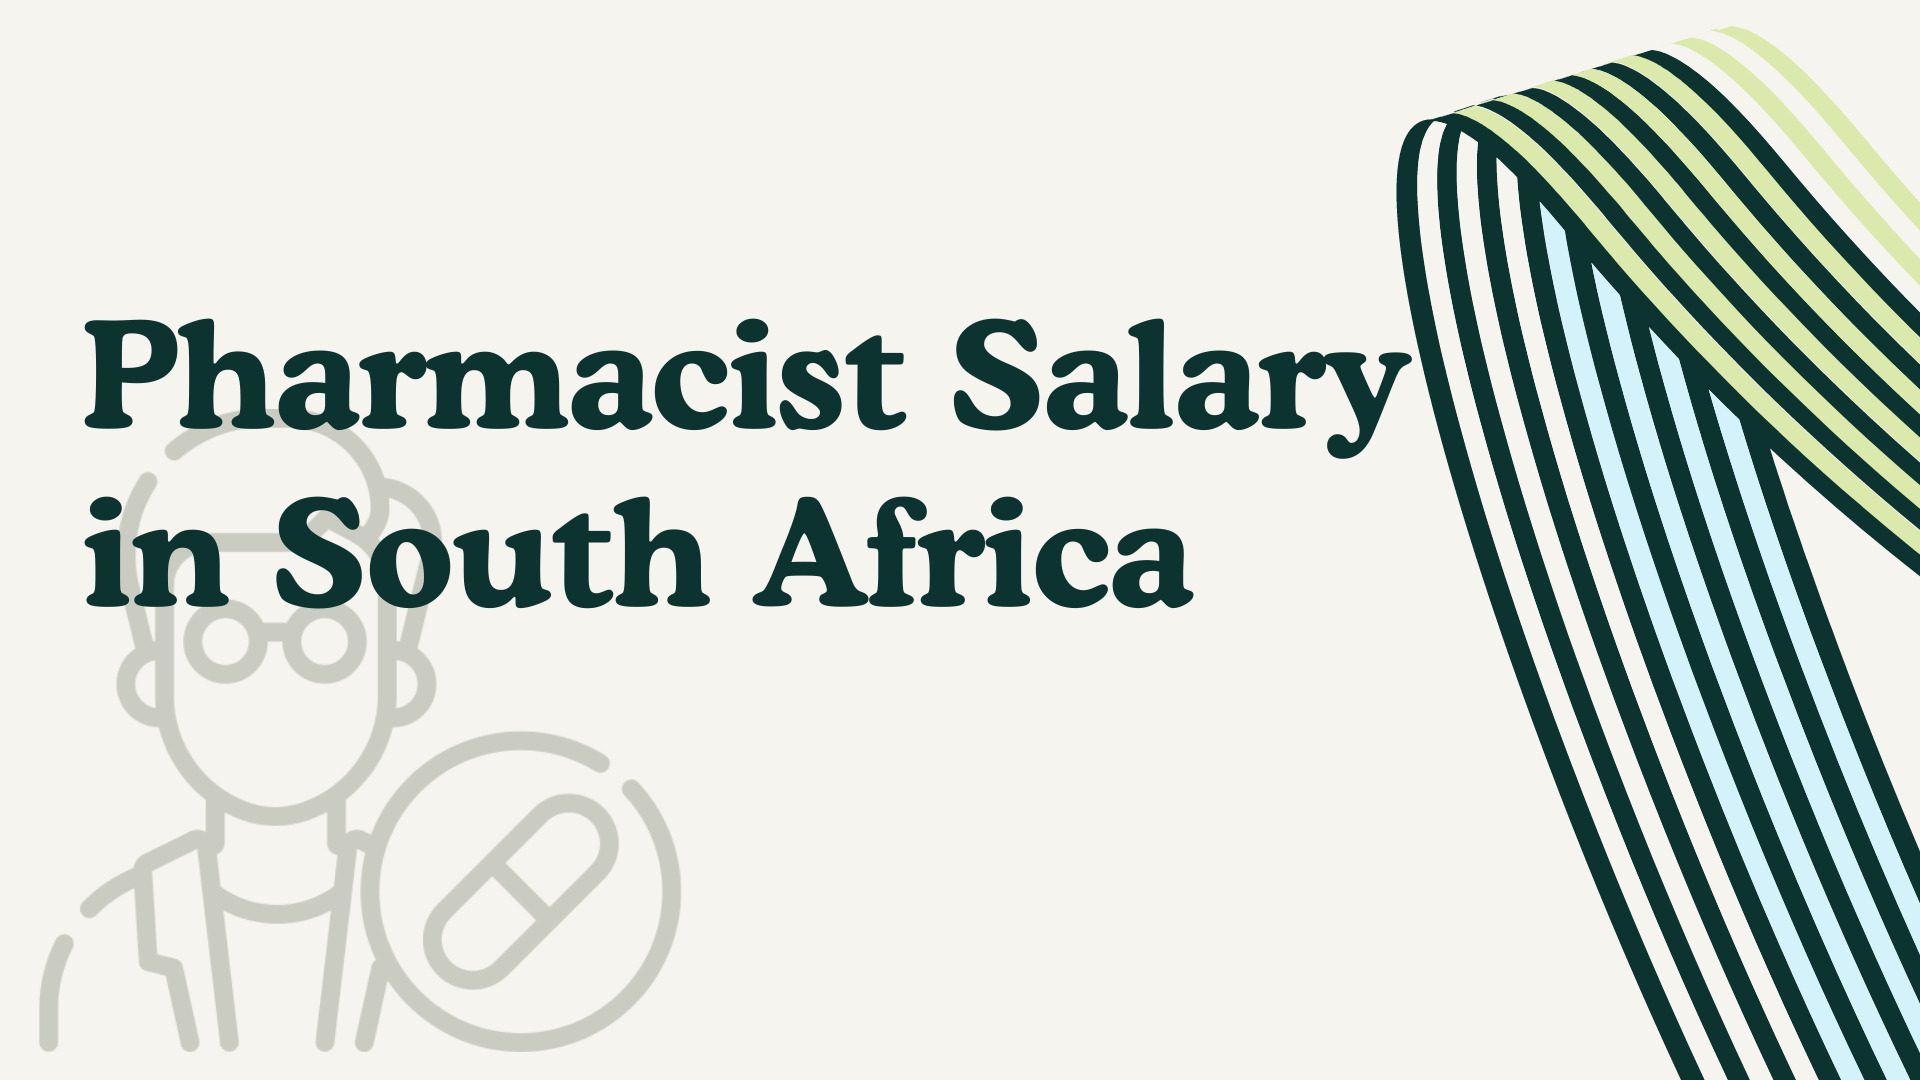 Pharmacist Salary in South Africa